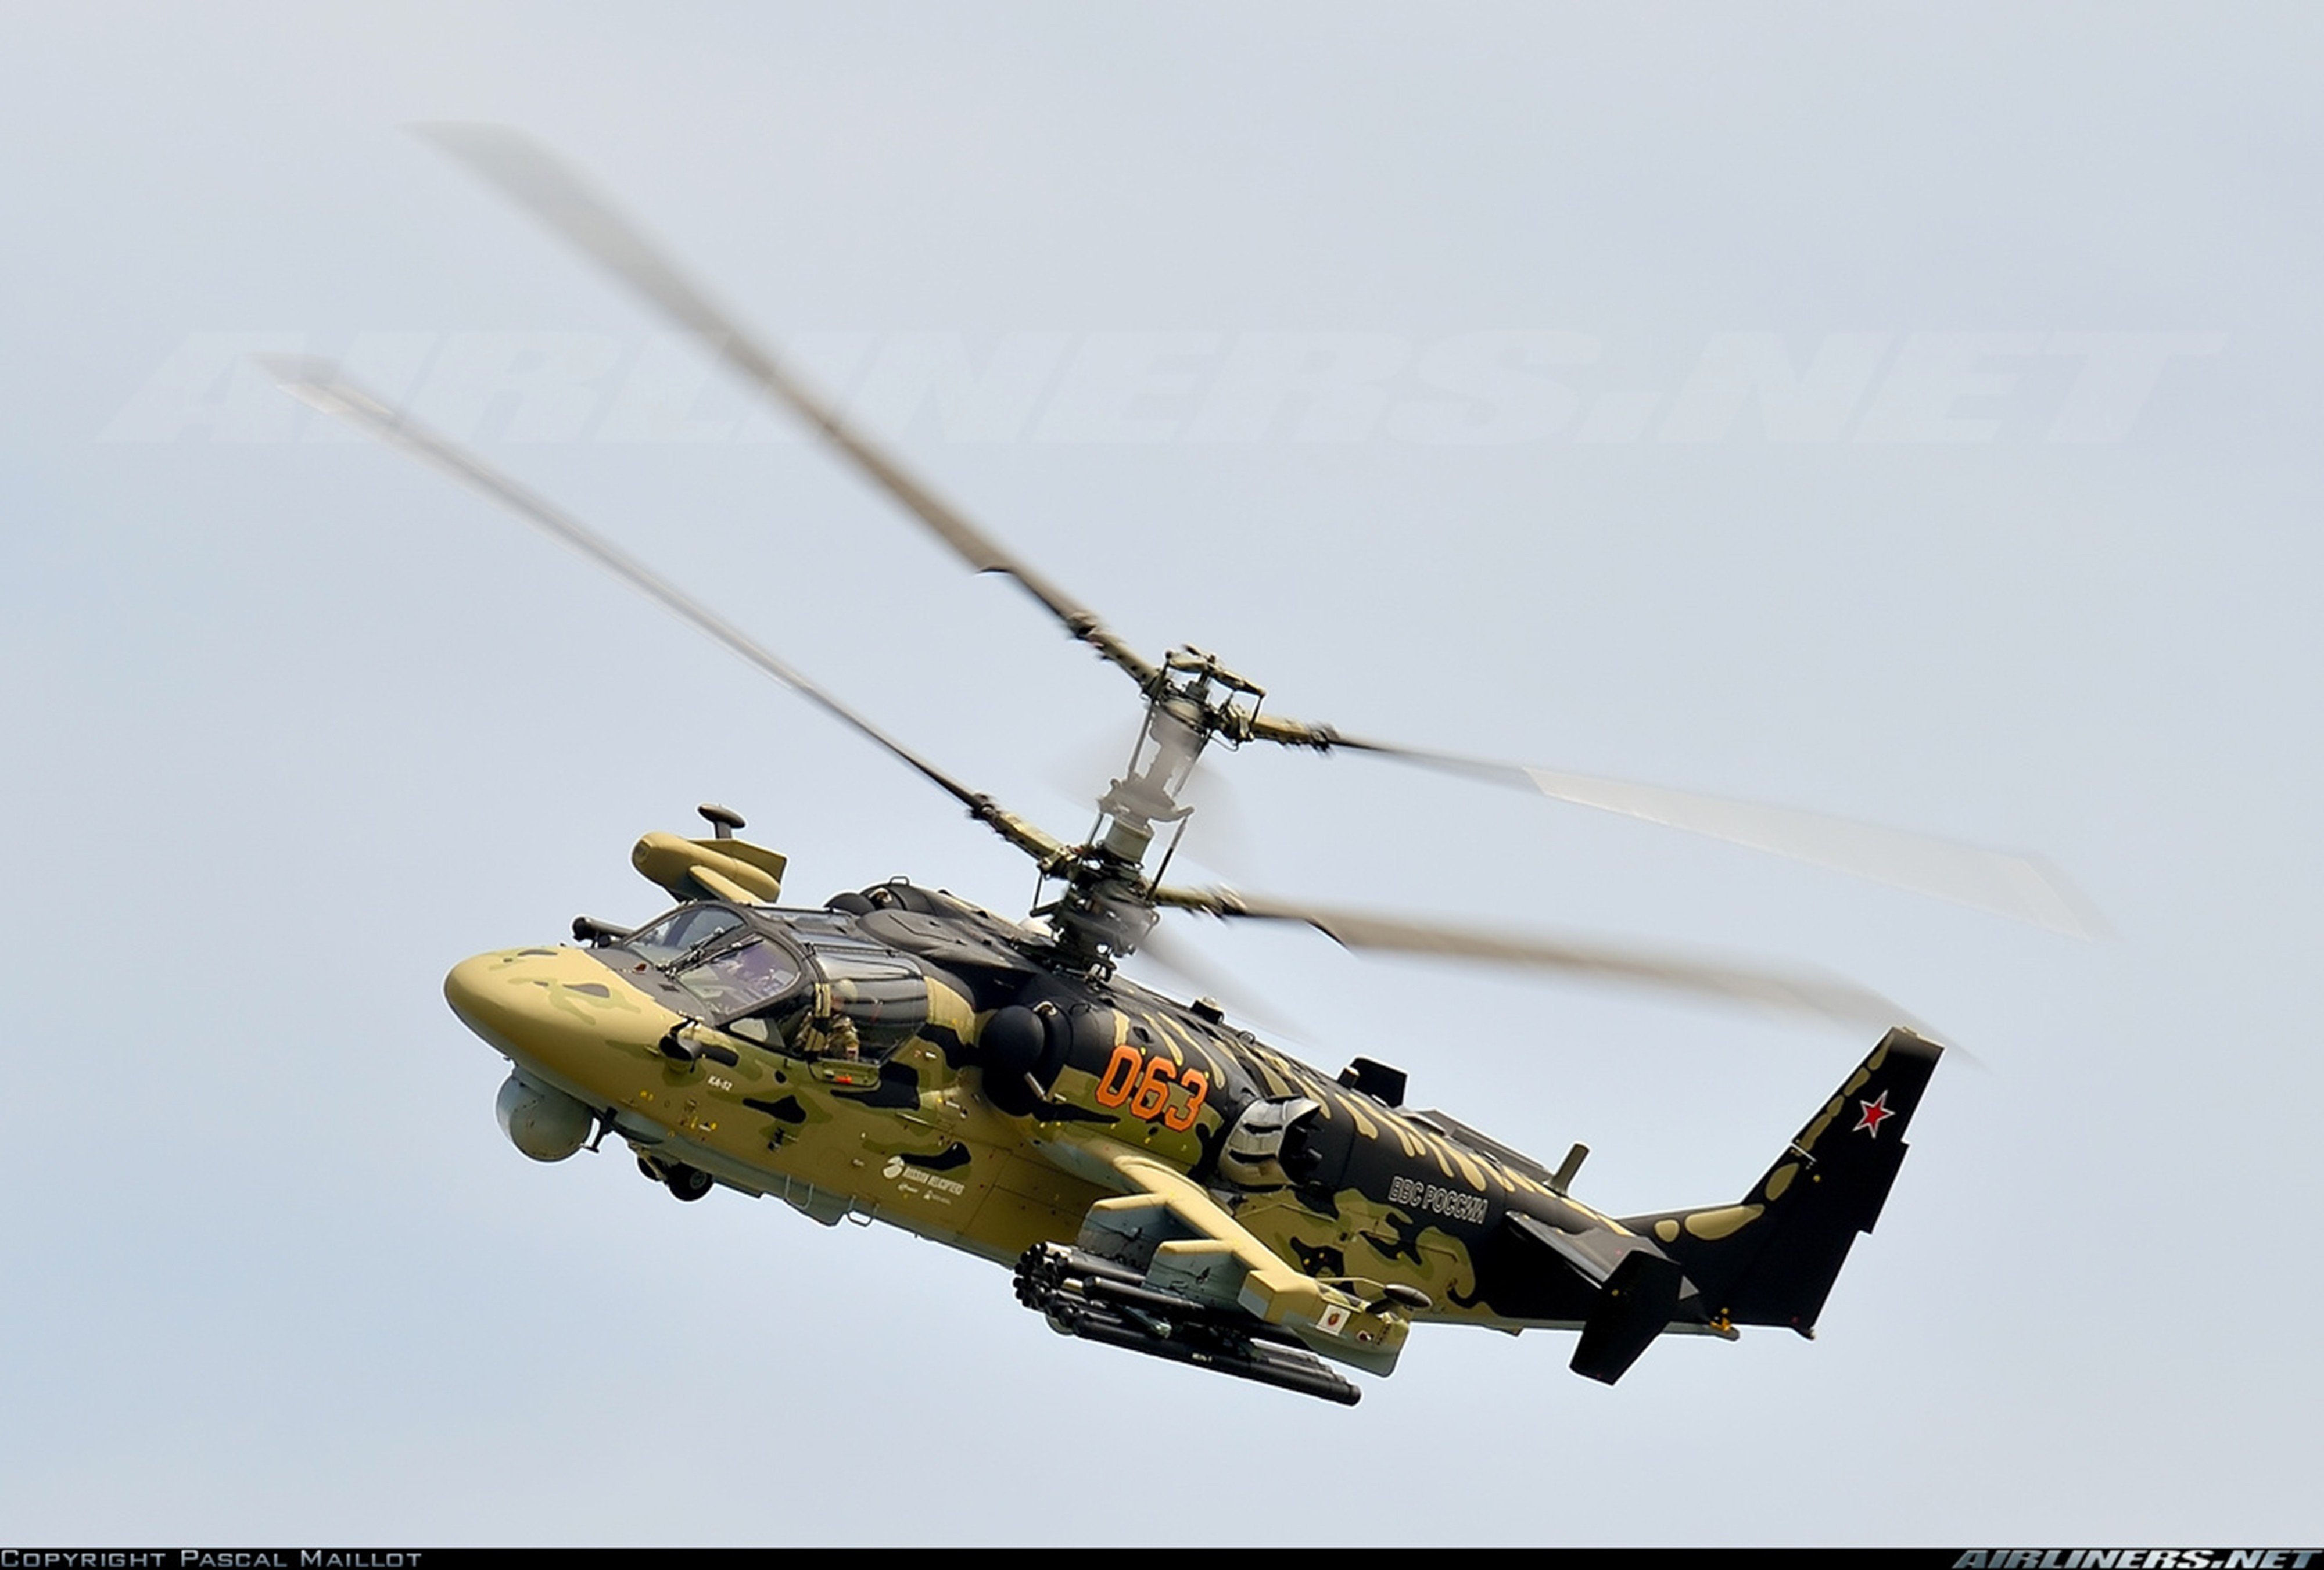 russian, Red, Star, Russia, Helicopter, Aircraft, Kamov, Ka 52, Alligator, Attack, Military, Air force Wallpaper